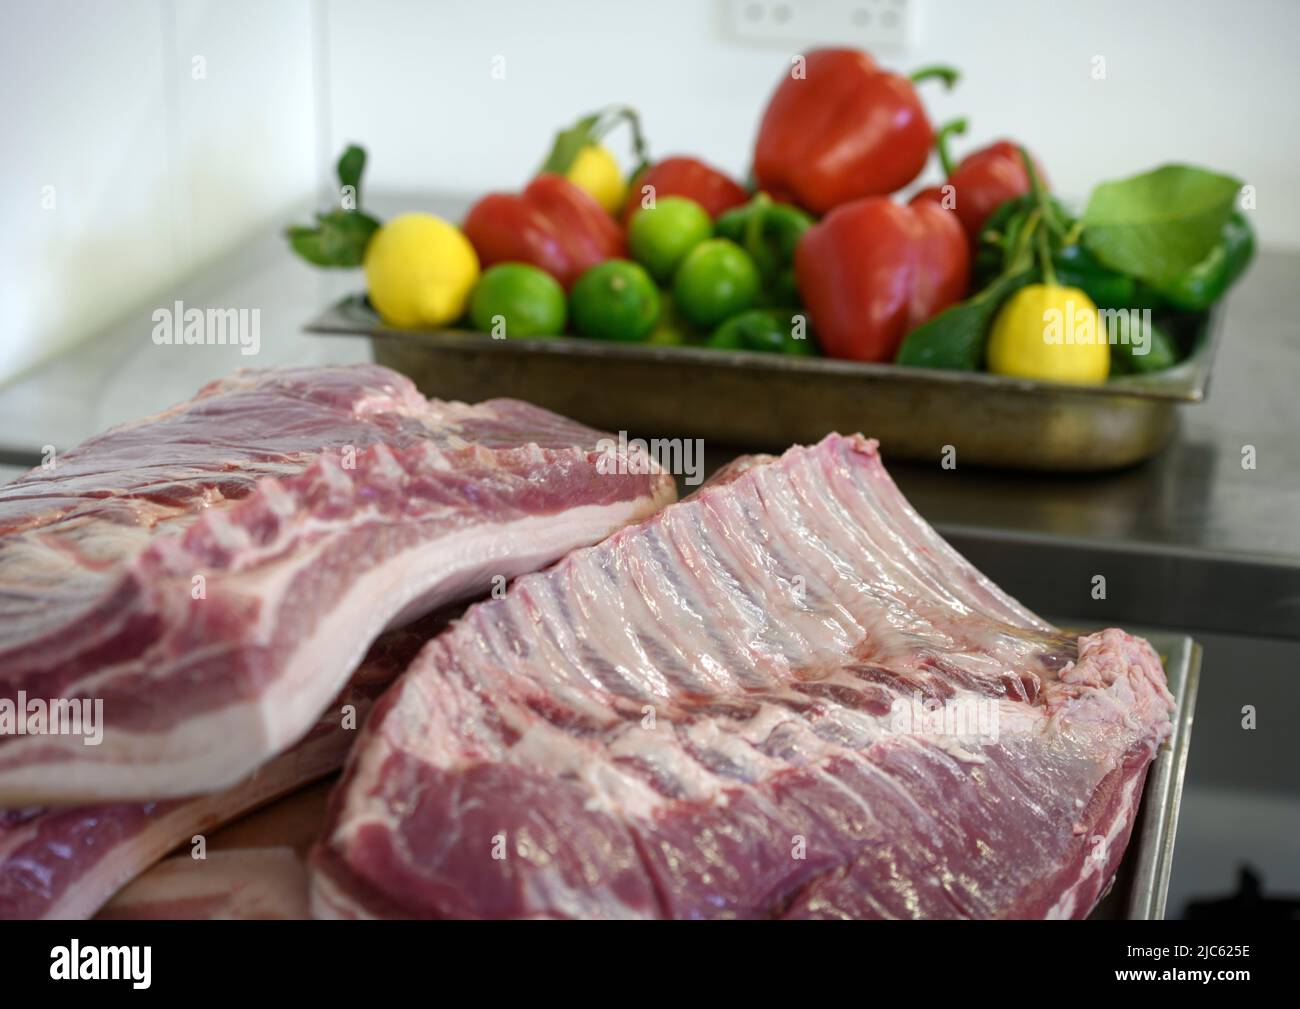 Pork ribs and a tray of colourful fuit and vegetables. Stock Photo